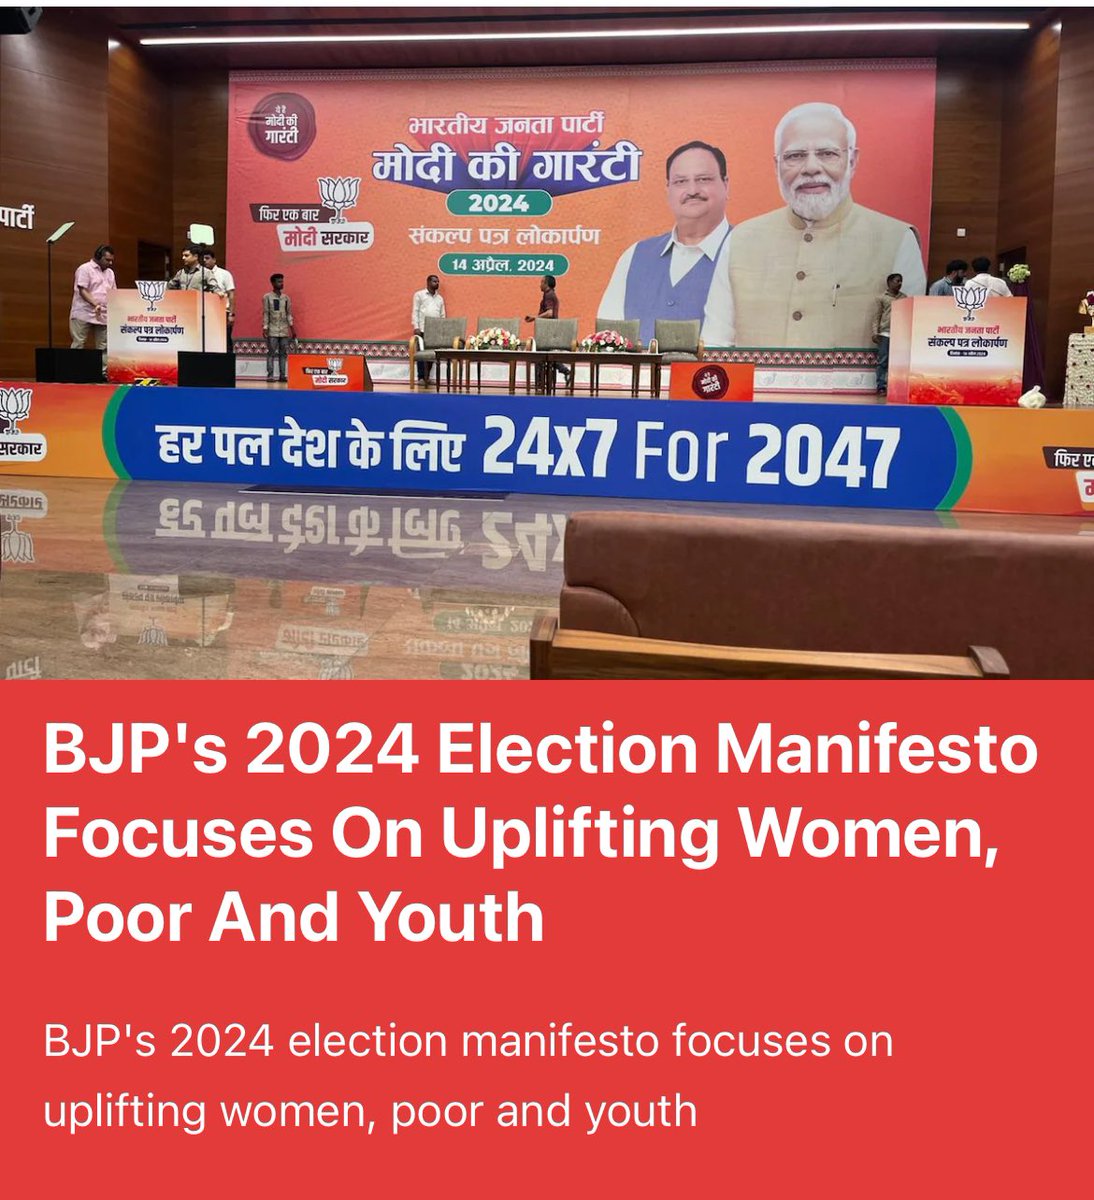 Modi ki Guarantee to uplift women, youth & poor 😂😂
Last 10 years his government tortured these section by inhuman policies and now comes up with fake guarantee! 

BJP manifesto is #JumlaFesto